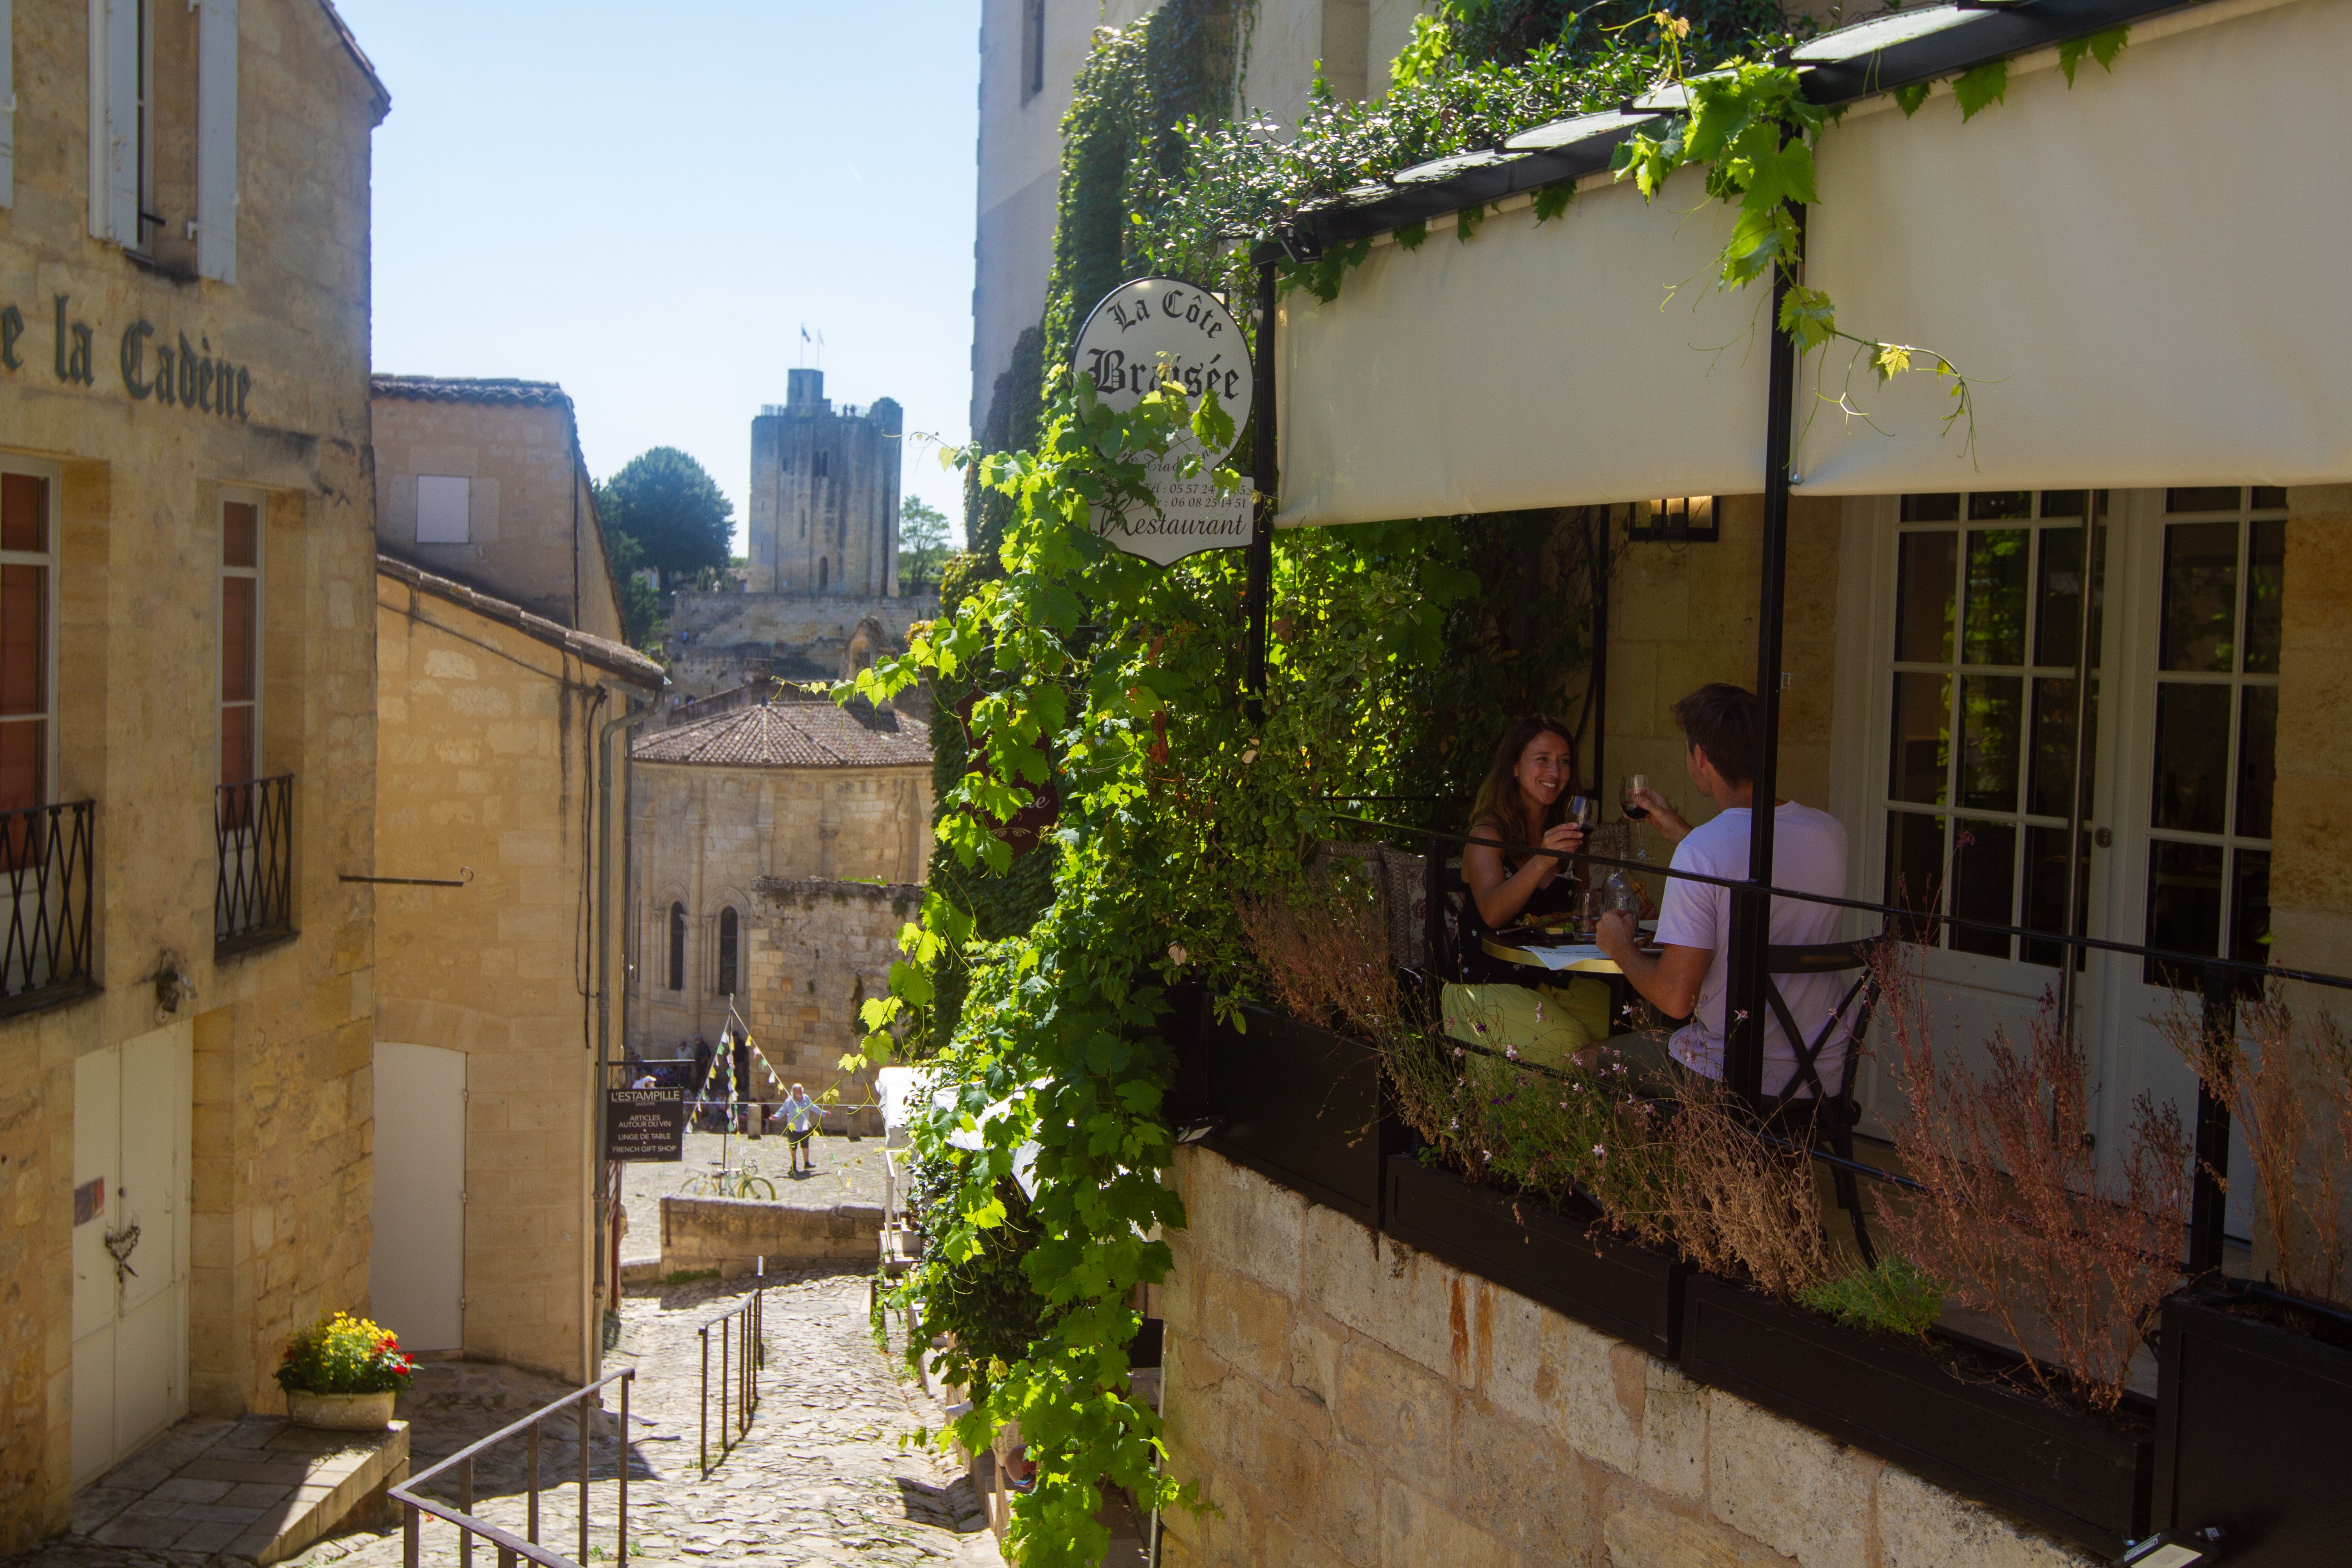 Saint Emilion is dotted with charming eateries, perfect for sampling local fayre